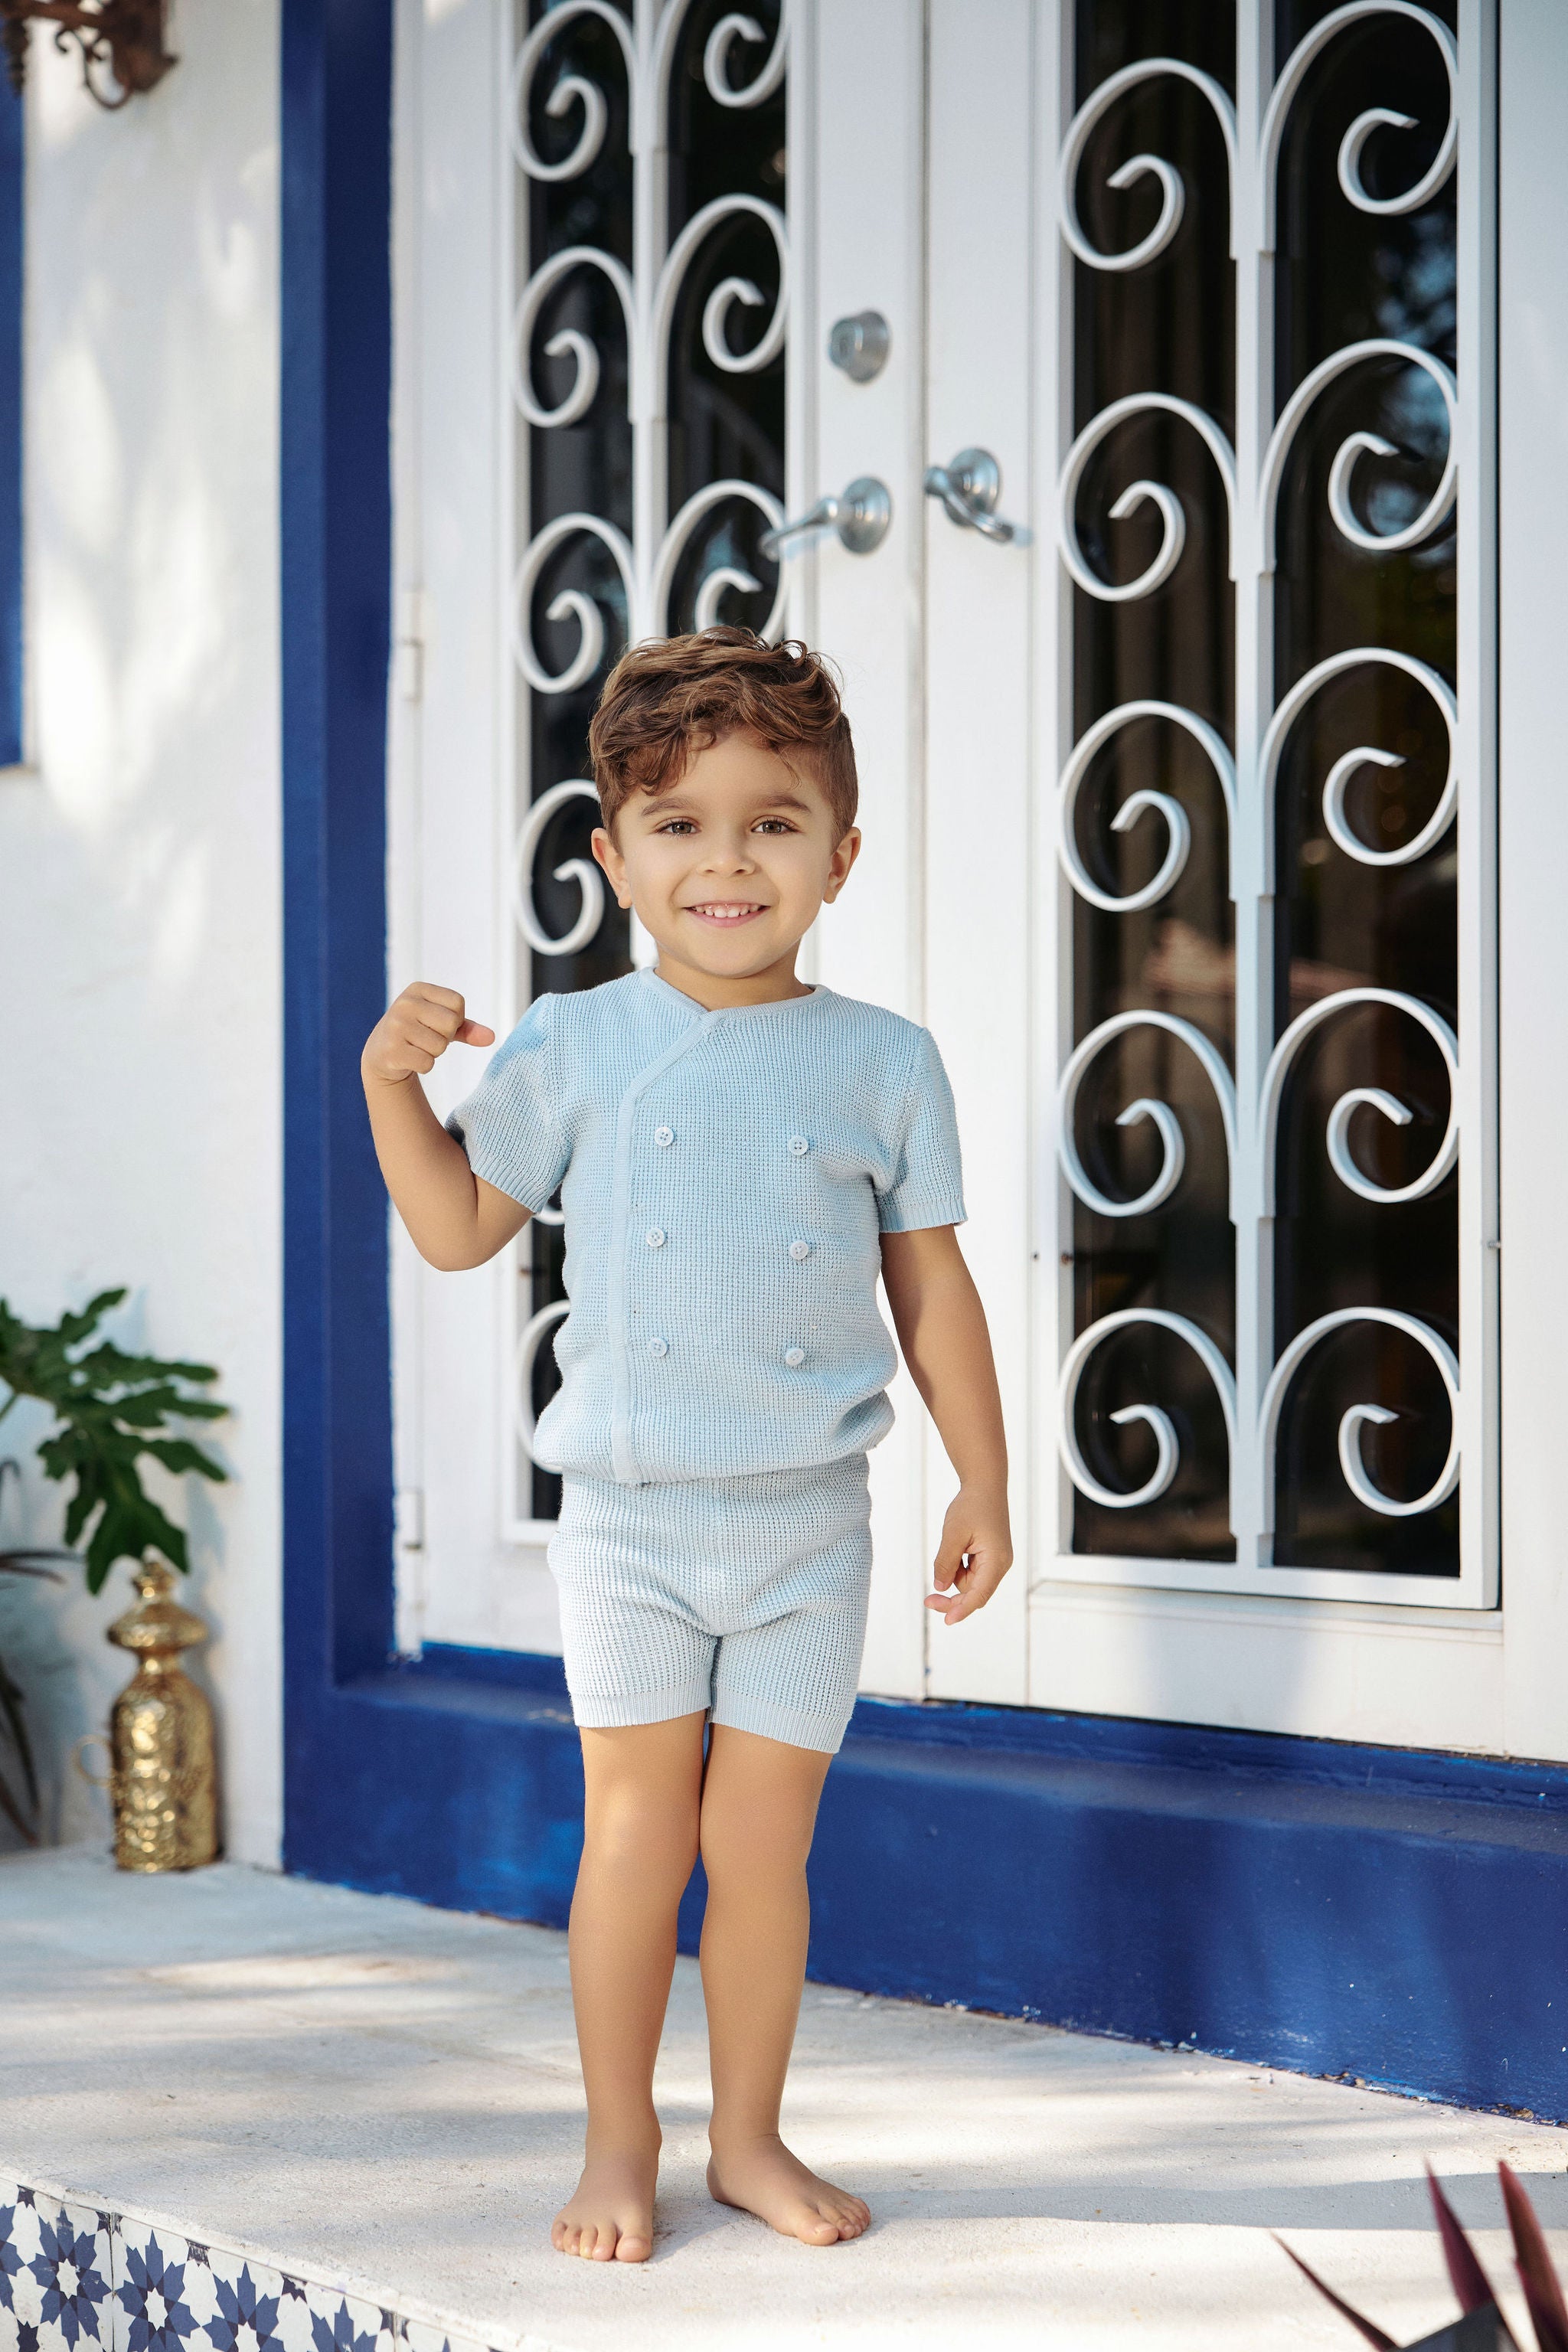 Ali Picks, AP Blue Hue Collection now available for preorder. Boys  coordinates will be available in a few days. #Ss24kids